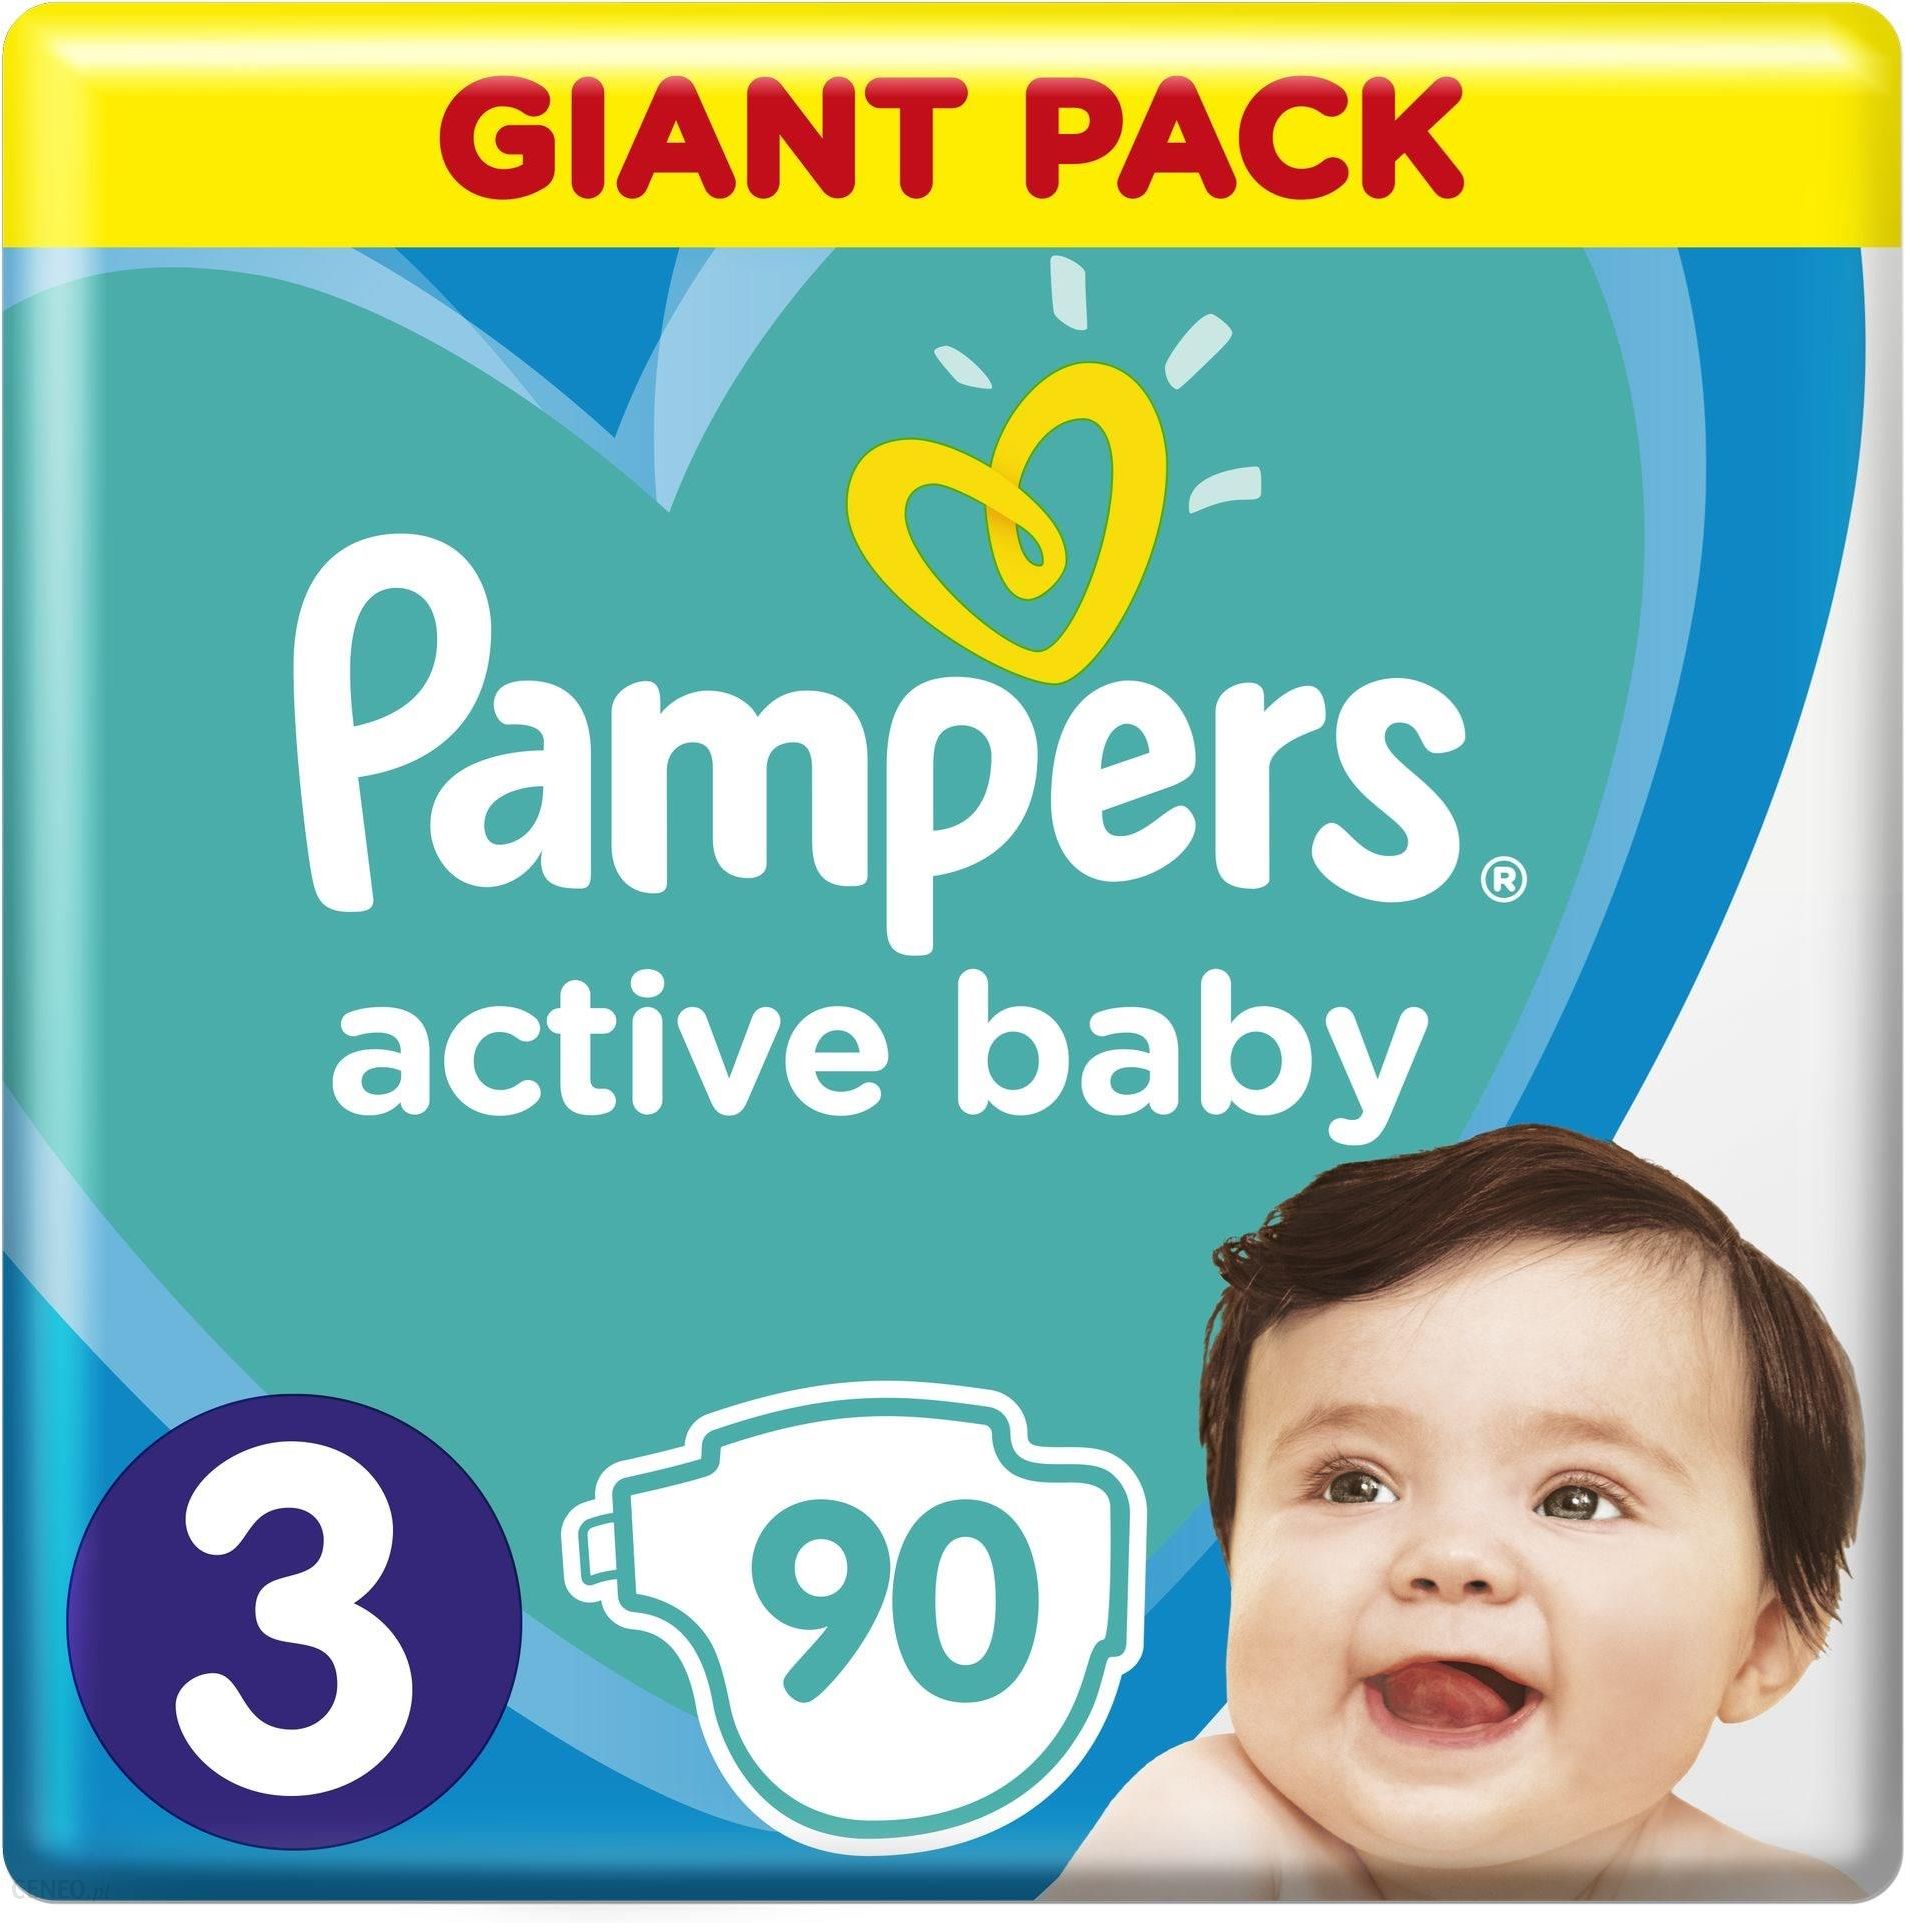 pampers active baby 3 ile miesiecy